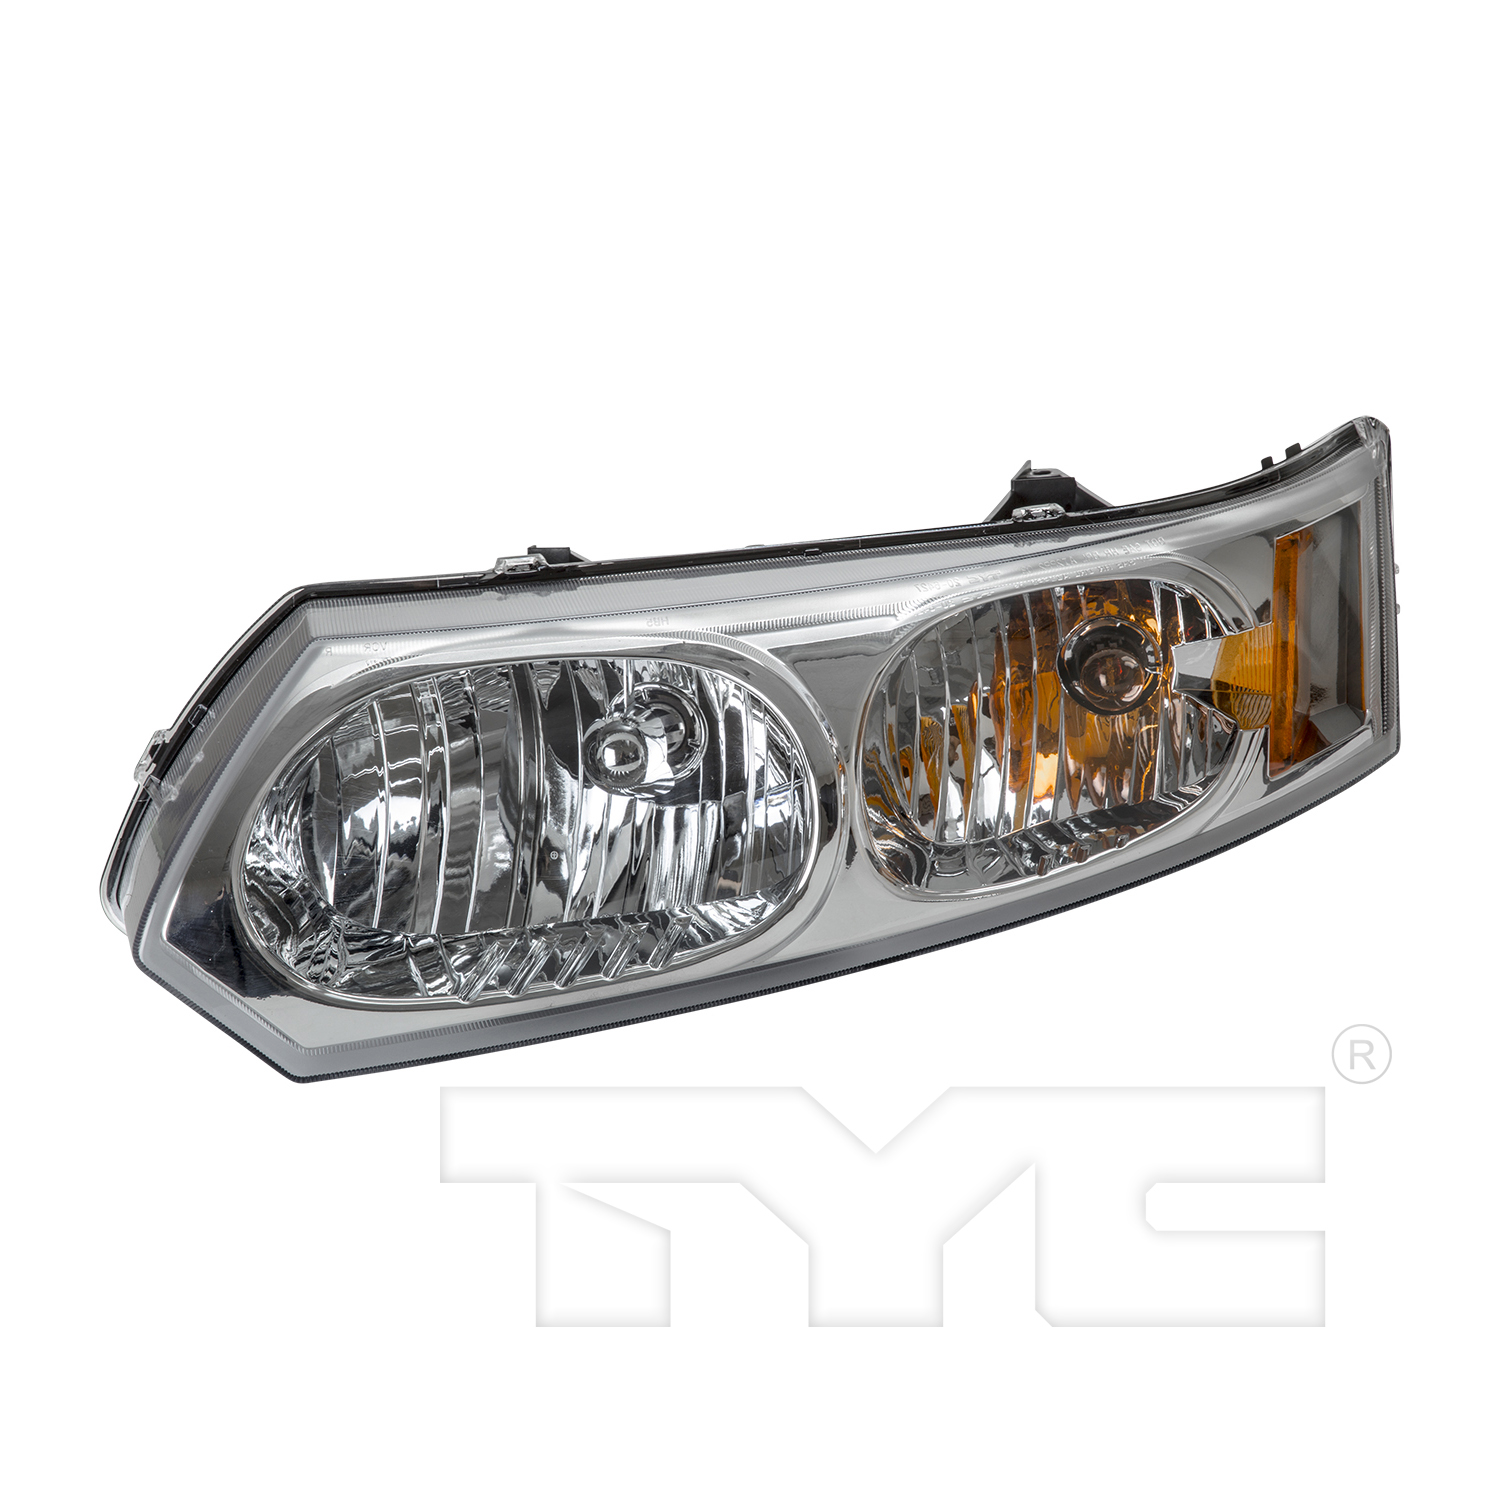 Aftermarket HEADLIGHTS for SATURN - ION, ION,03-07,LT Headlamp assy composite